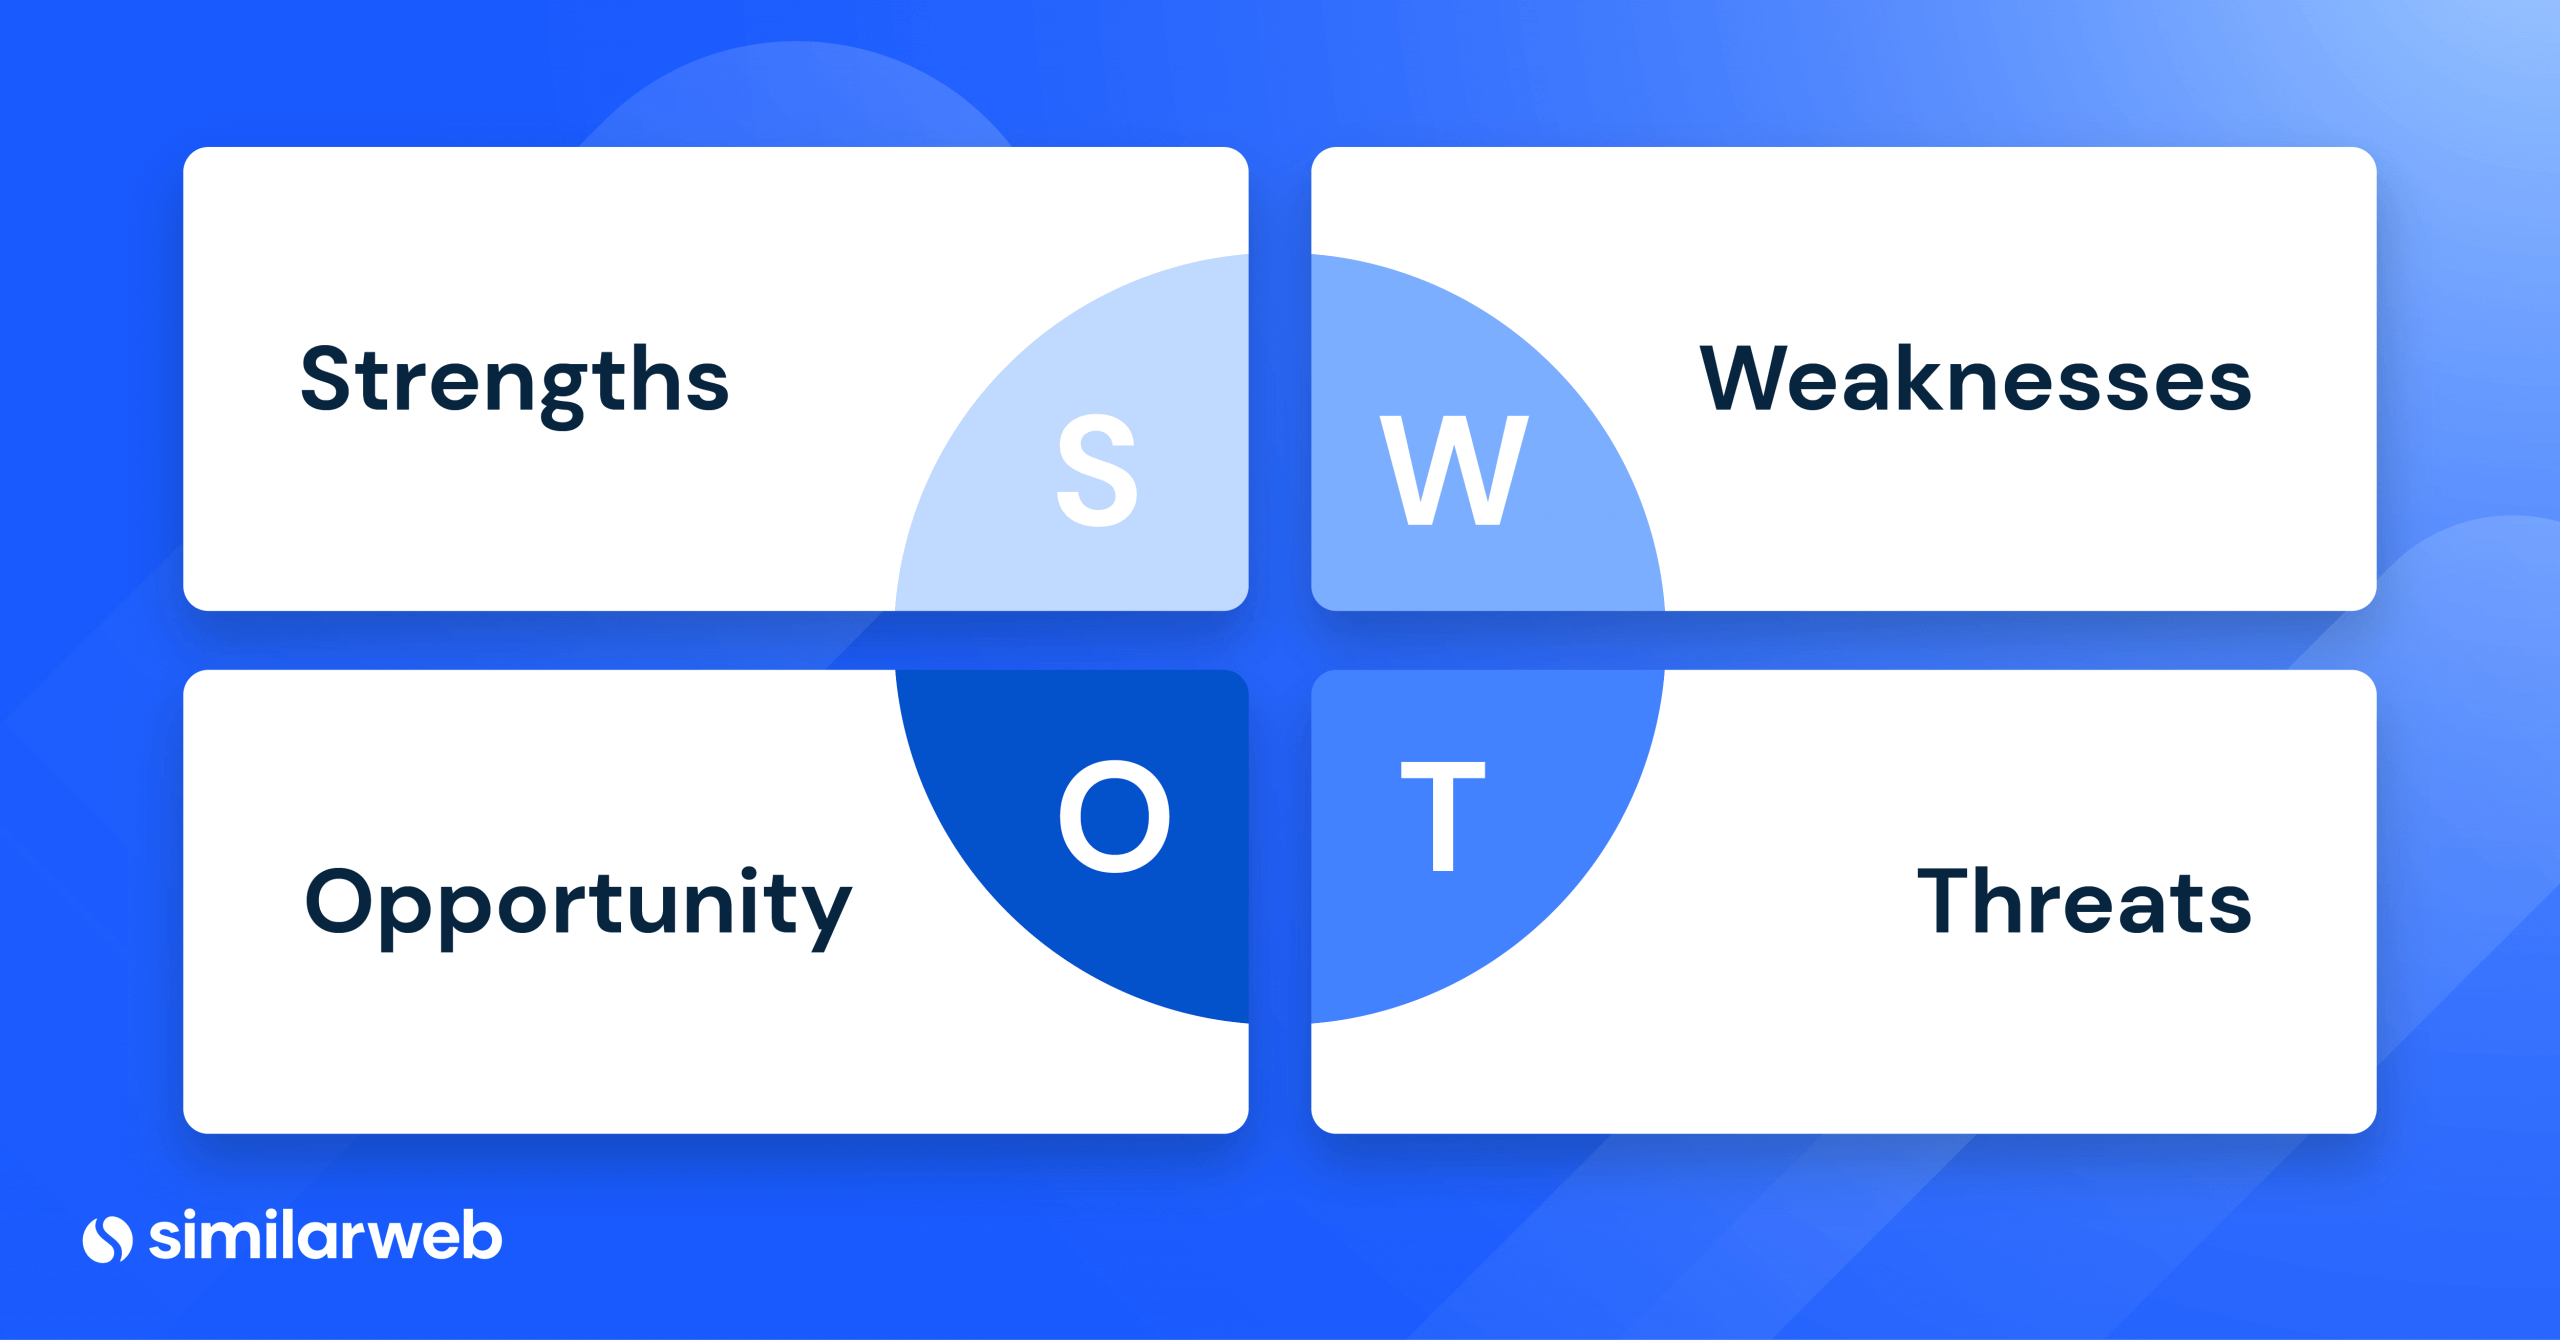 SWOT analysis is strengths, weaknesses, opportunities and threats.